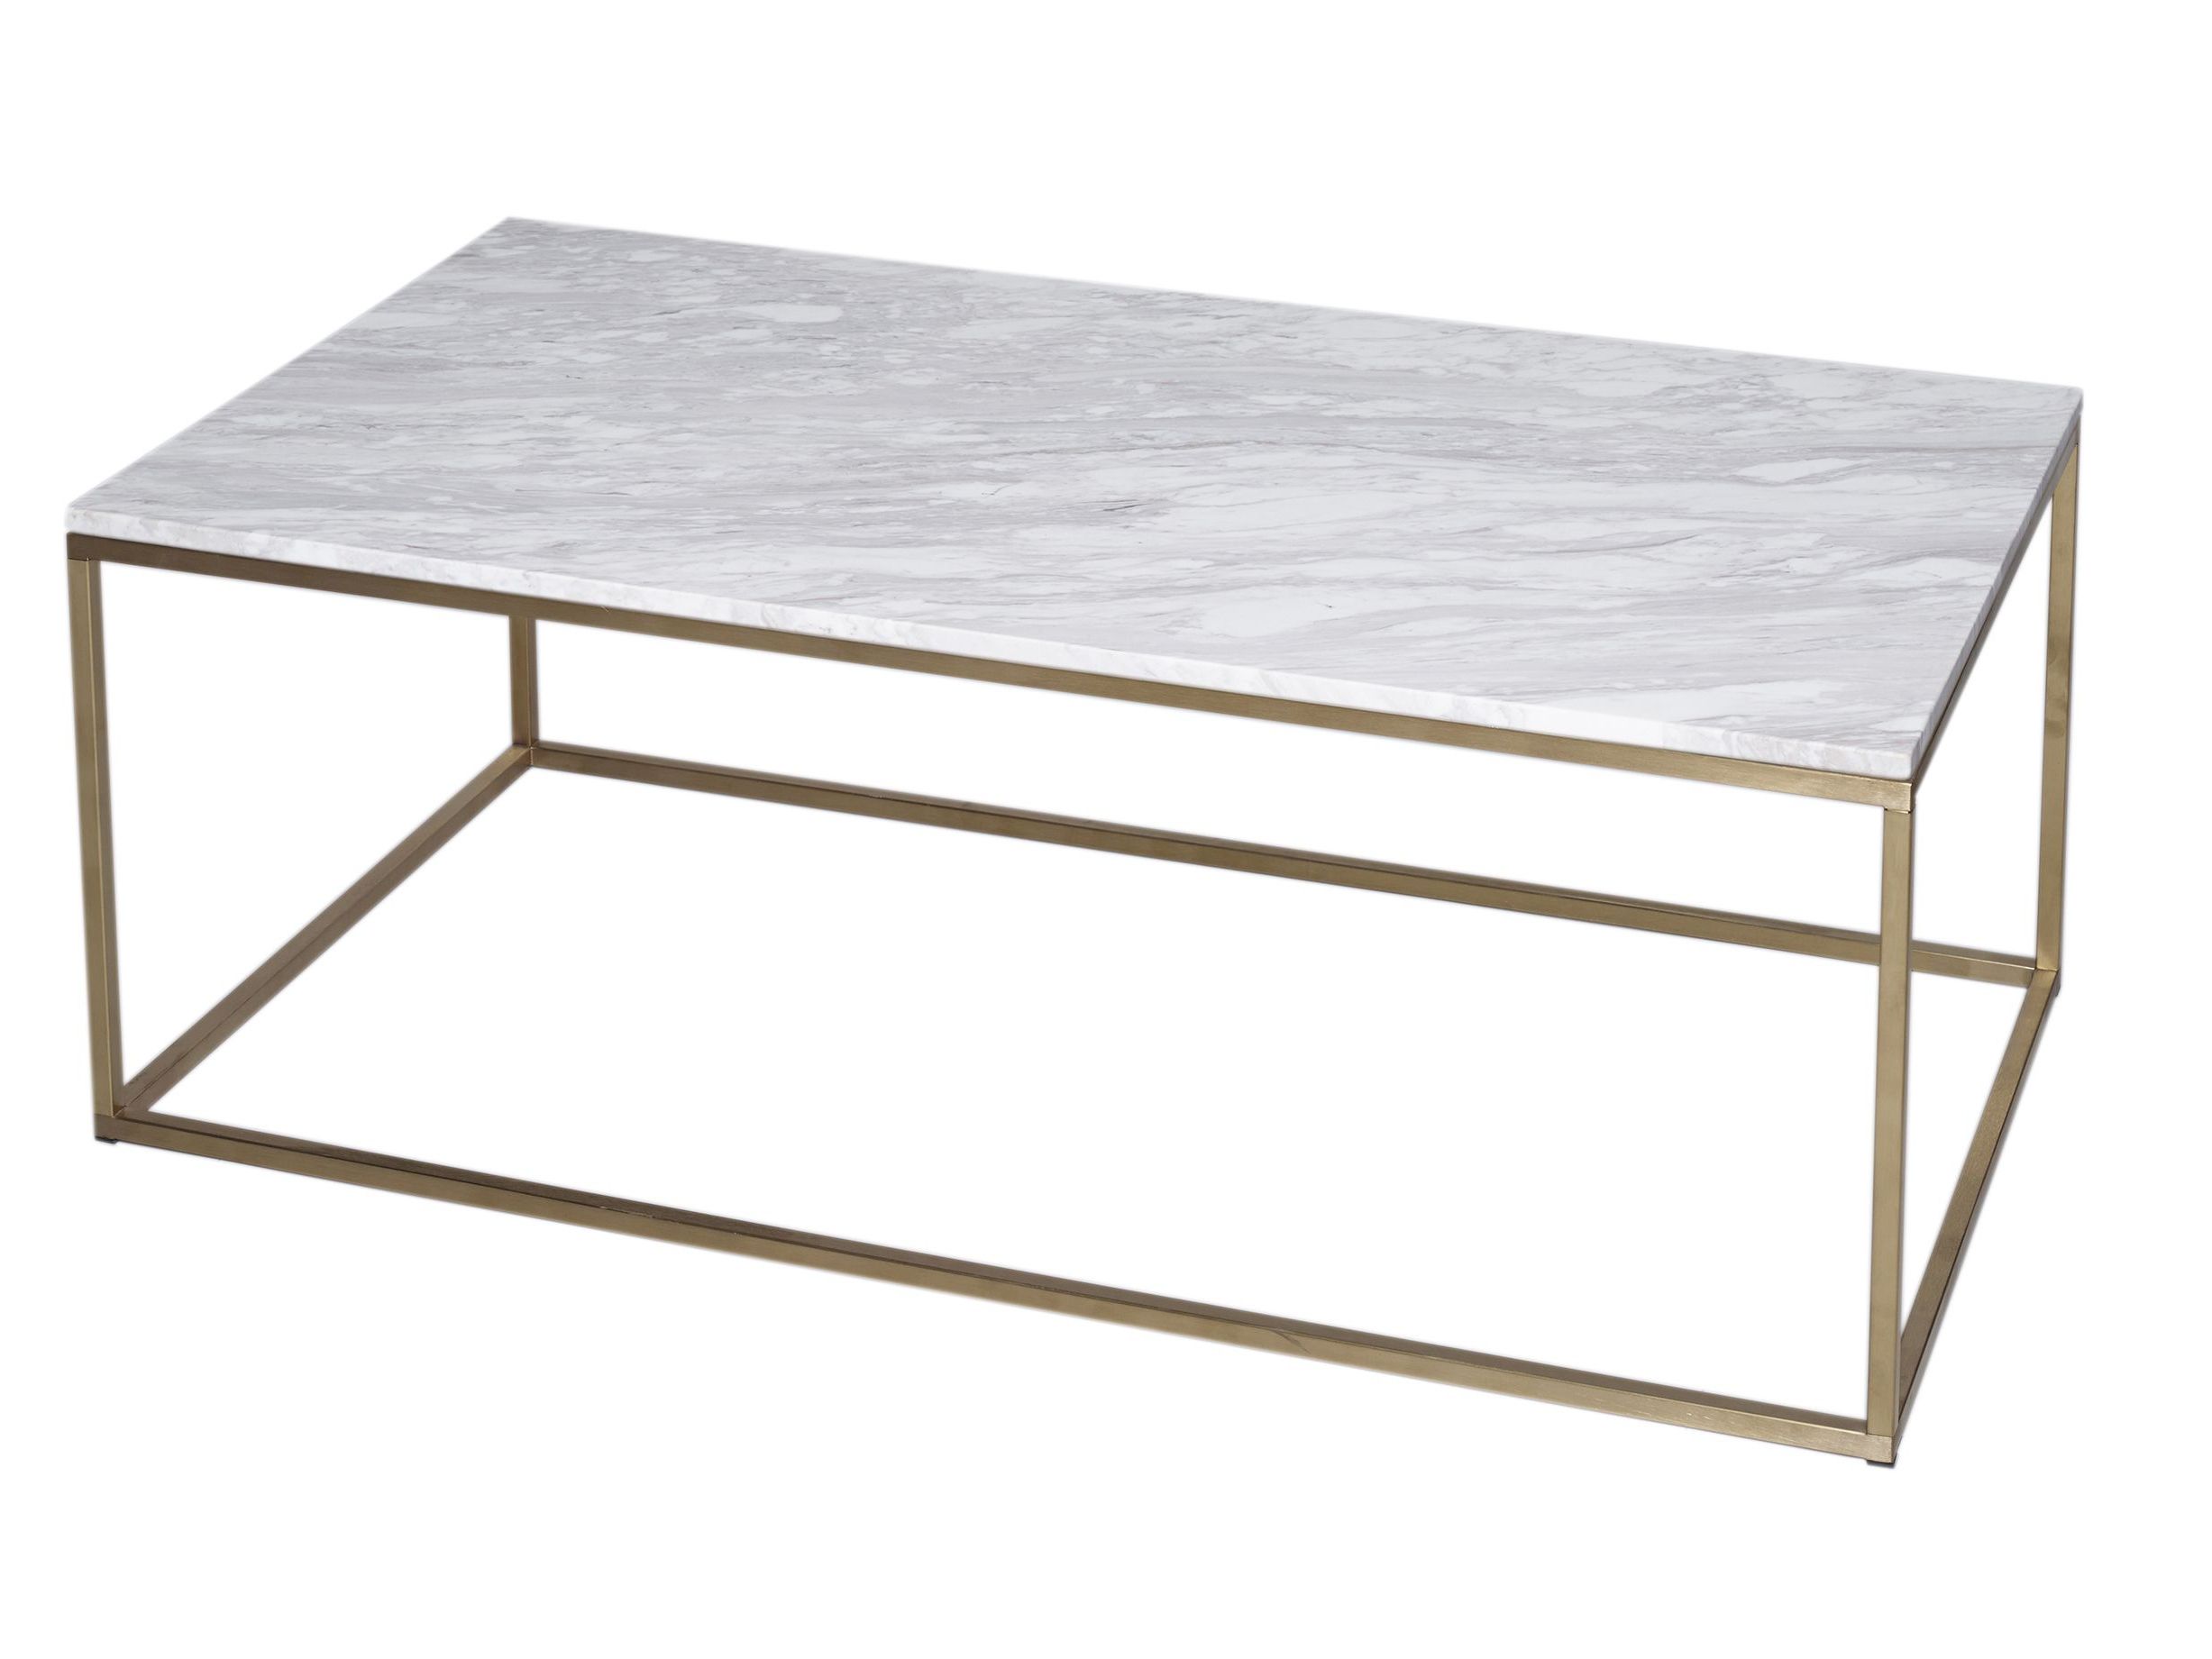 Most Up To Date Rectangular Coffee Table – Kensal Marble With Brass Base With Rectangular Coffee Tables With Brass Legs (View 3 of 20)